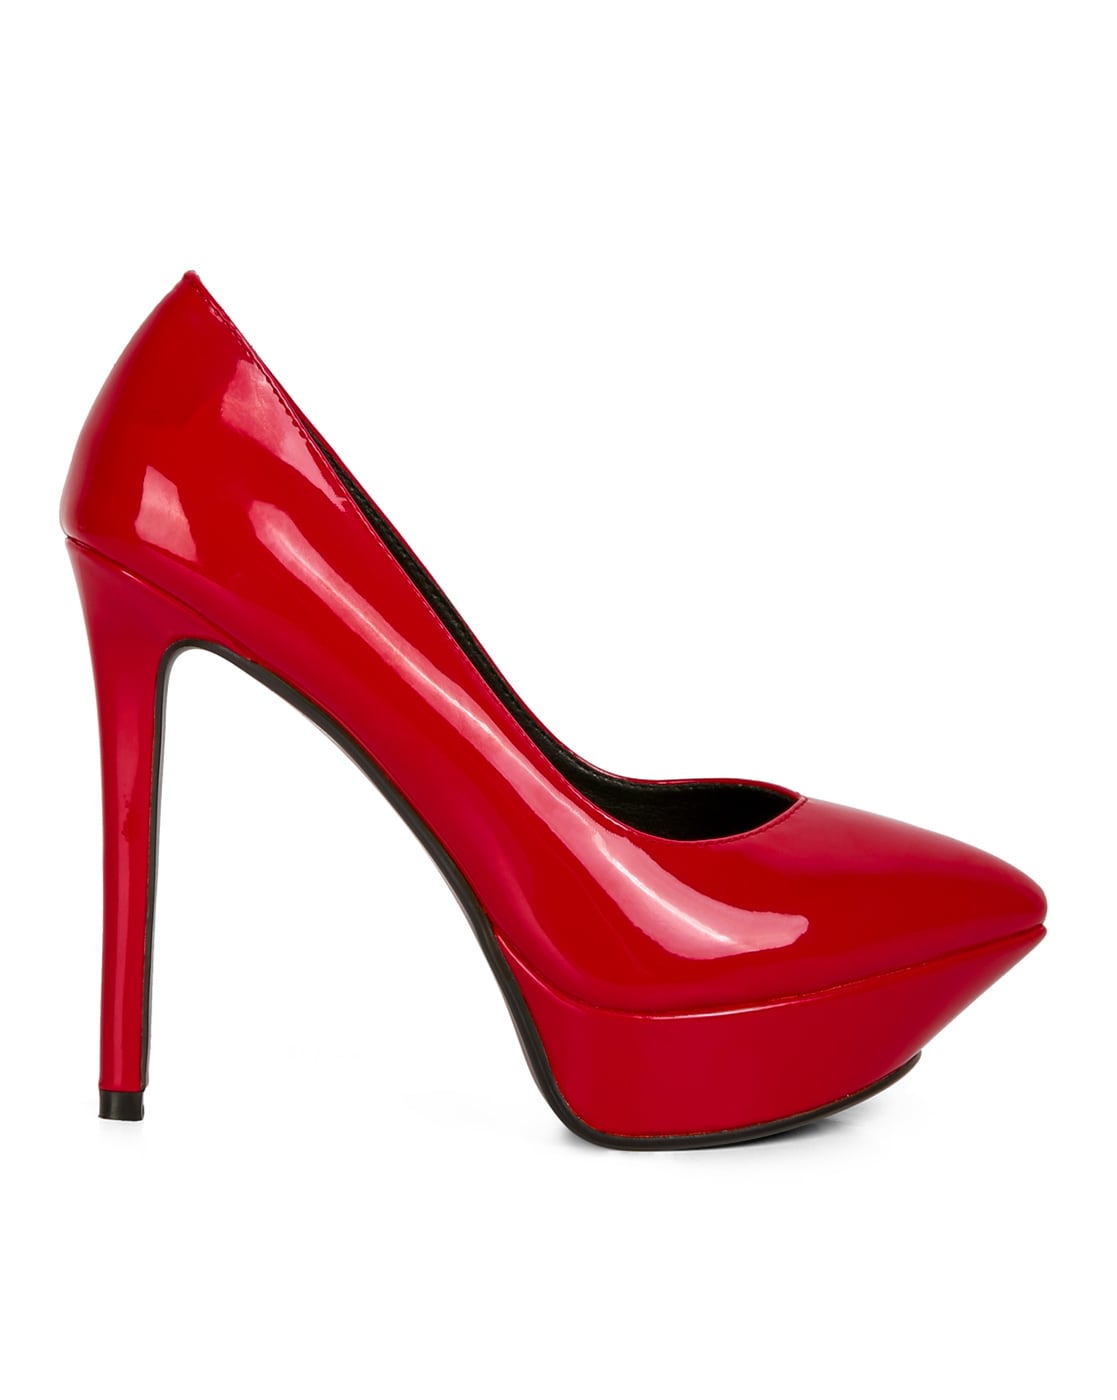 How to Walk in Heels and Stilettos - HubPages